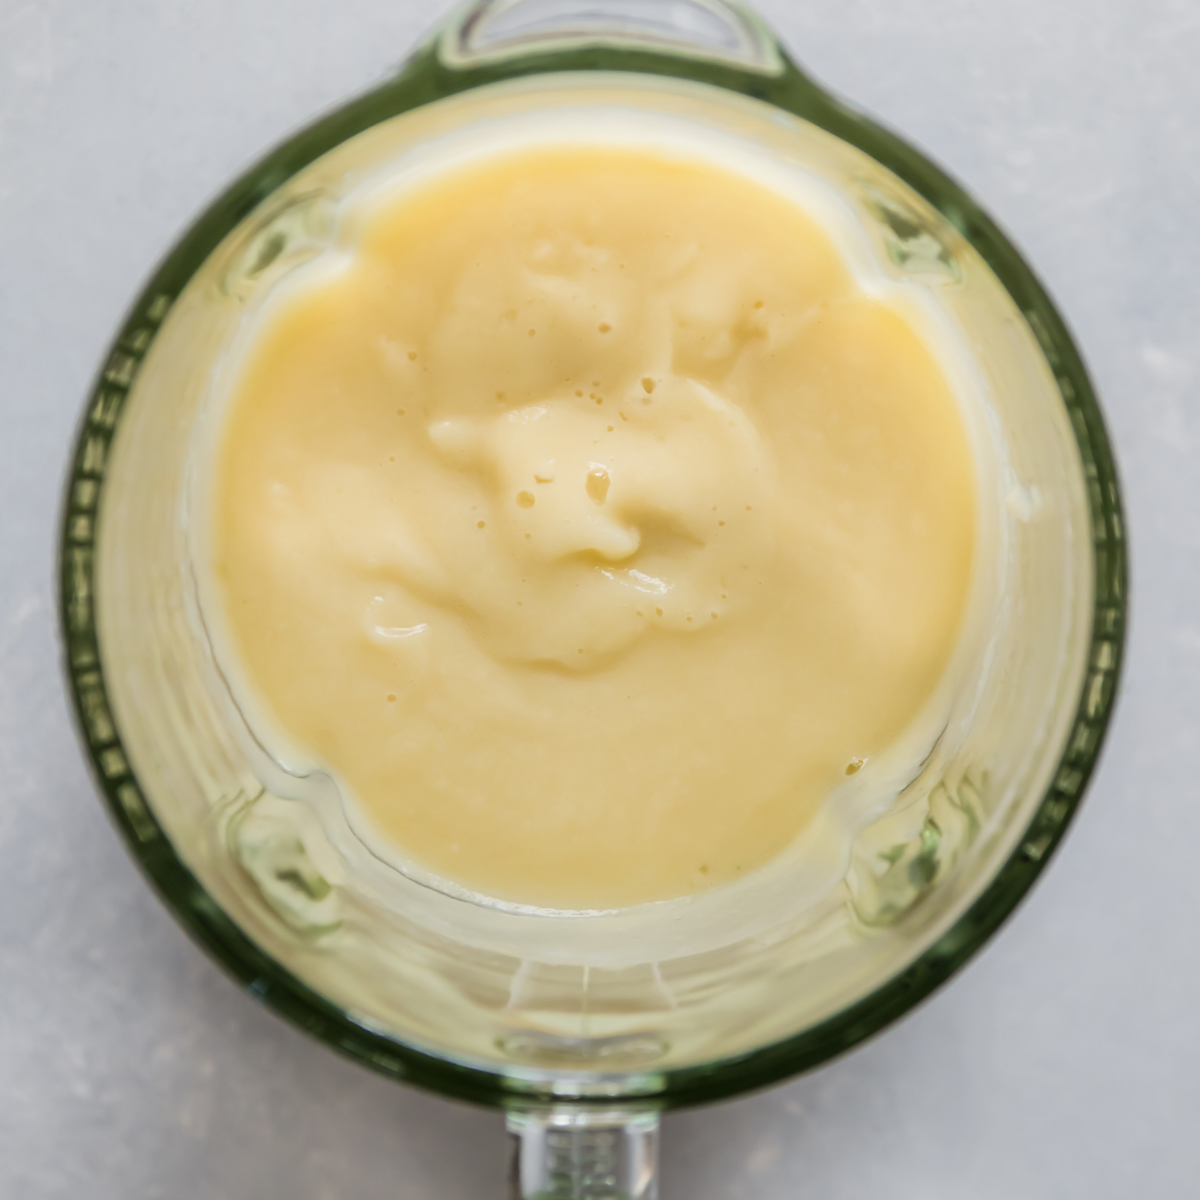 Glass blender filled with puréed cauliflower.